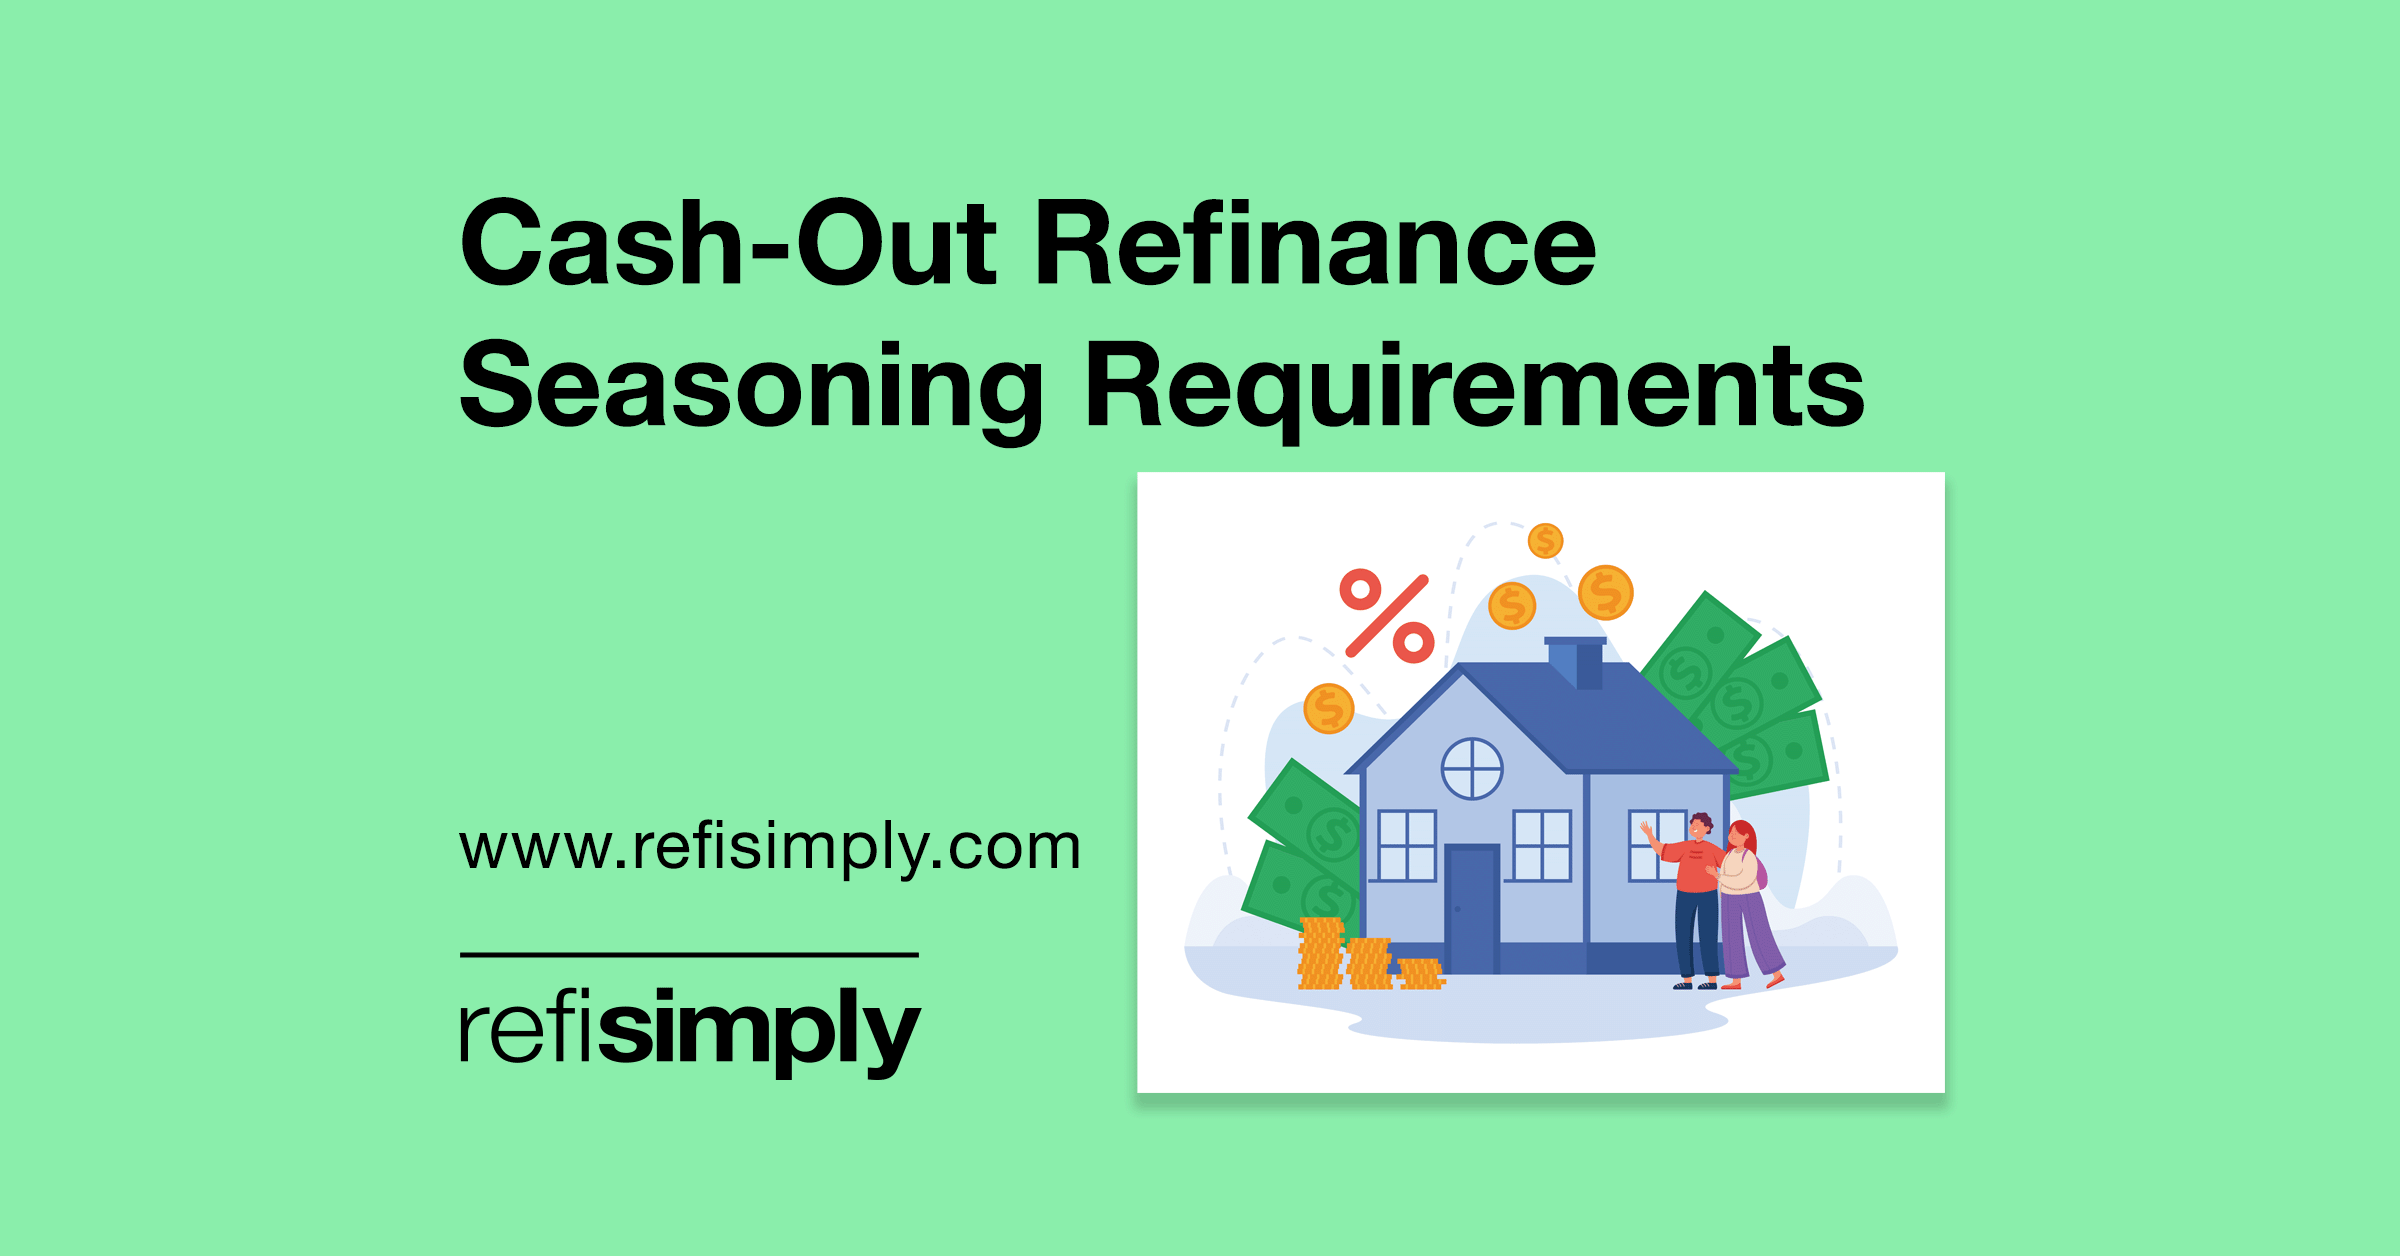 Cash out refinance seasoning requirements